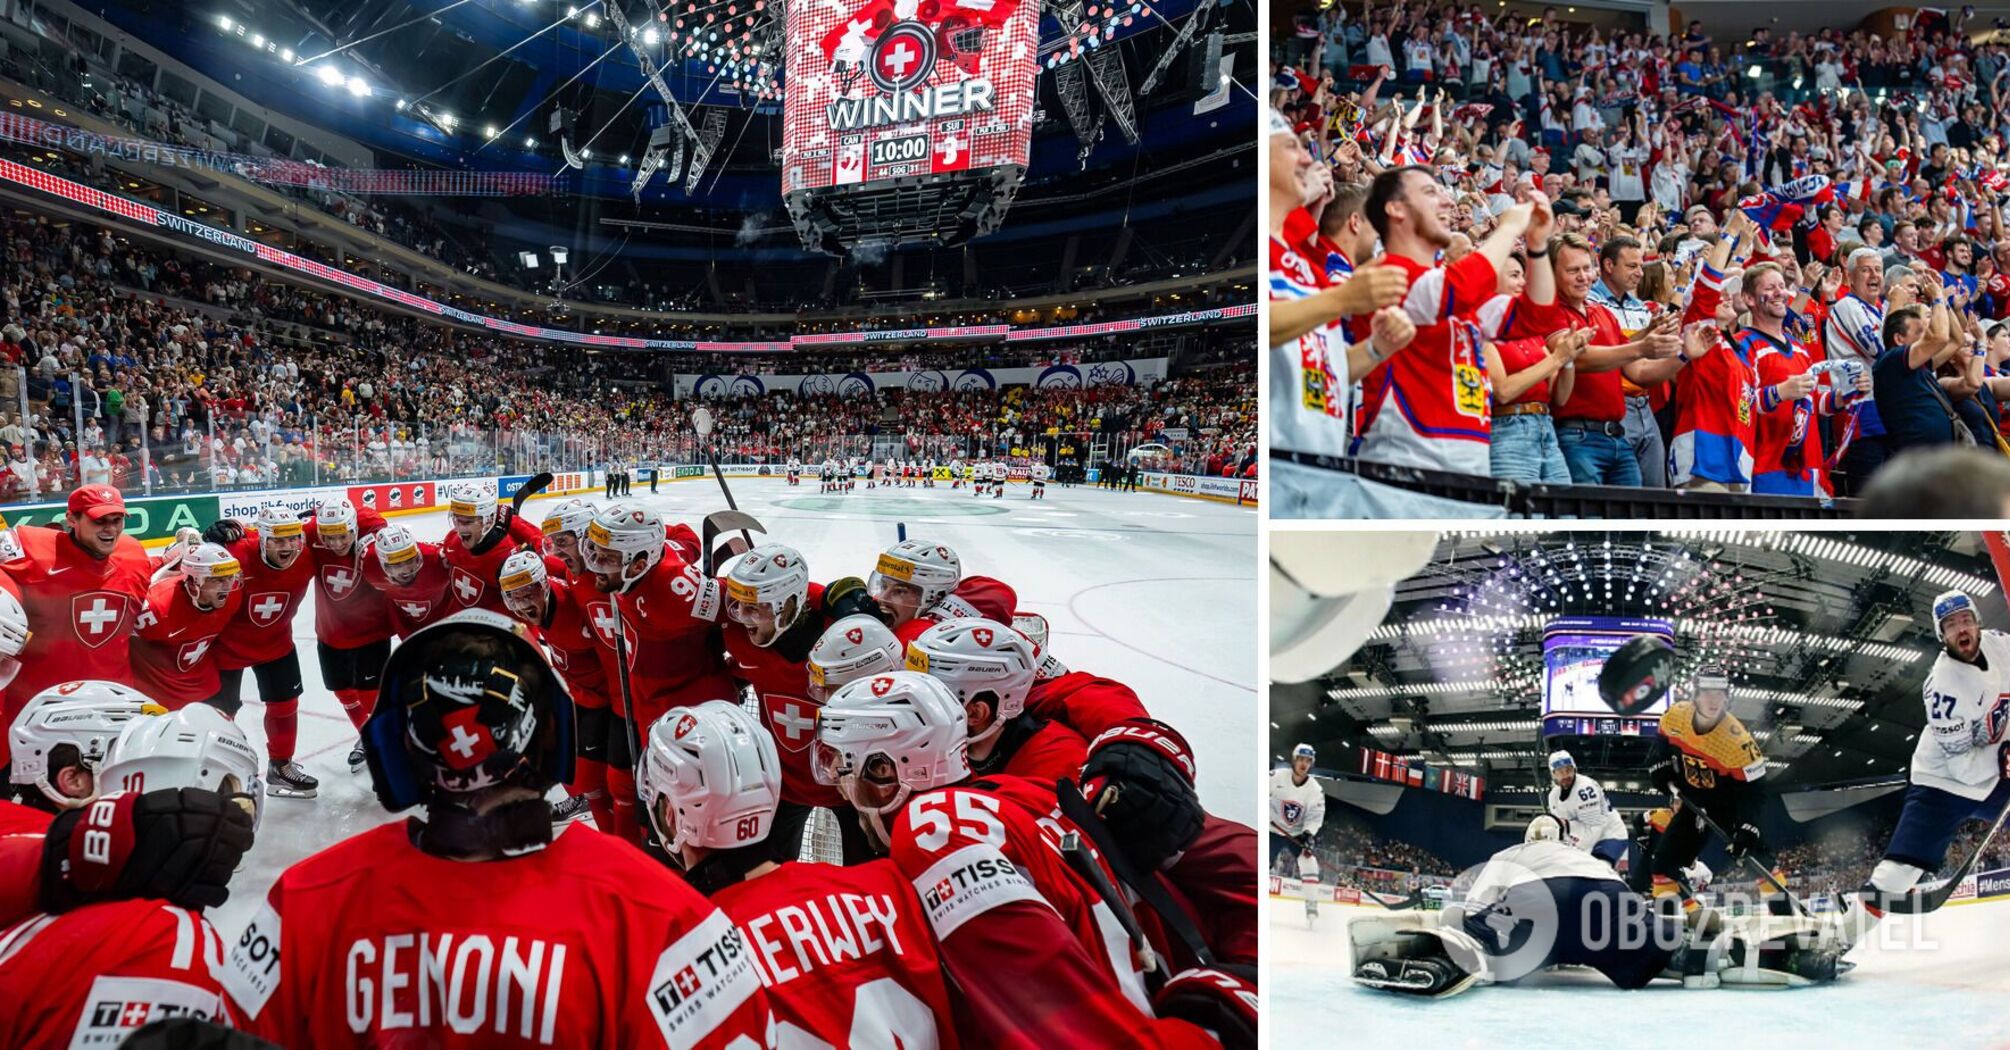 For the first time in history. An impressive record was set at the World Ice Hockey Championship